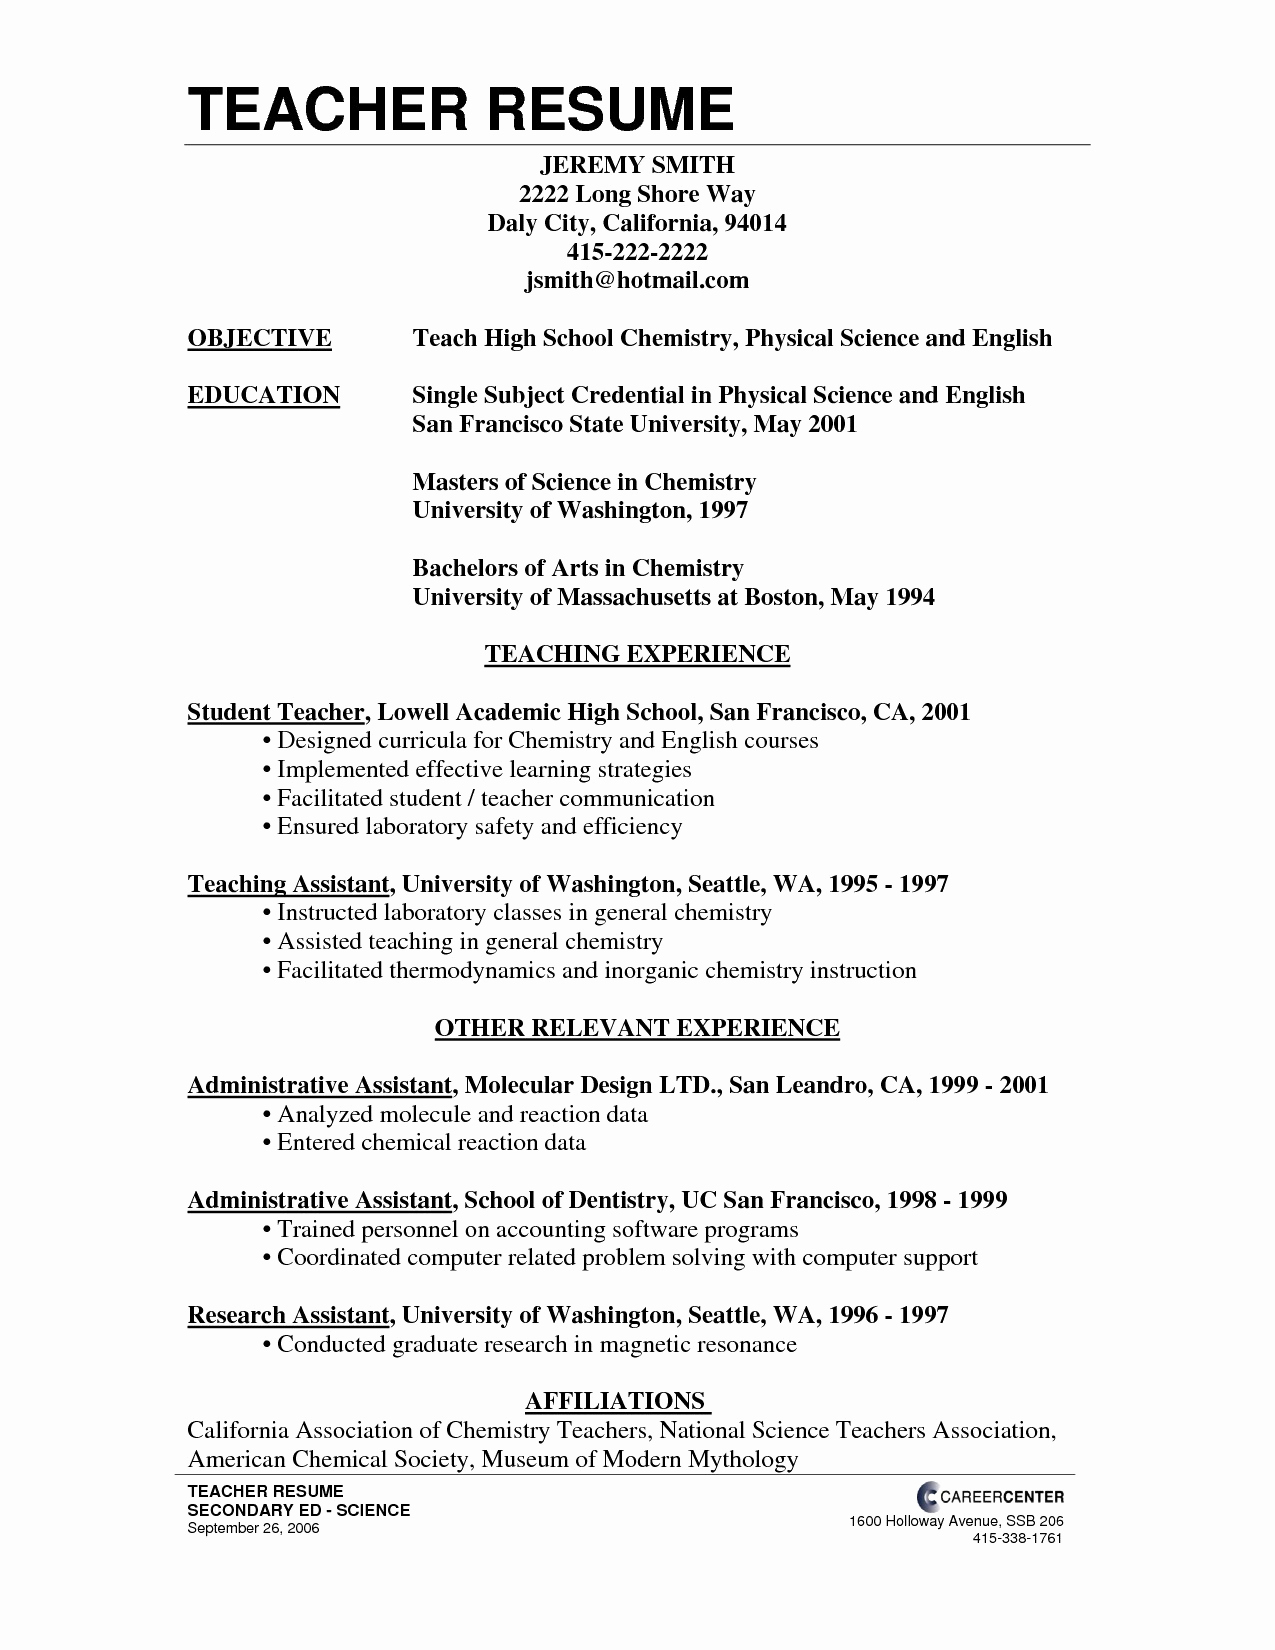 Modern Resume and Cover Letter Template - Resume Templates Word Free New Free Cover Letter Templates Examples